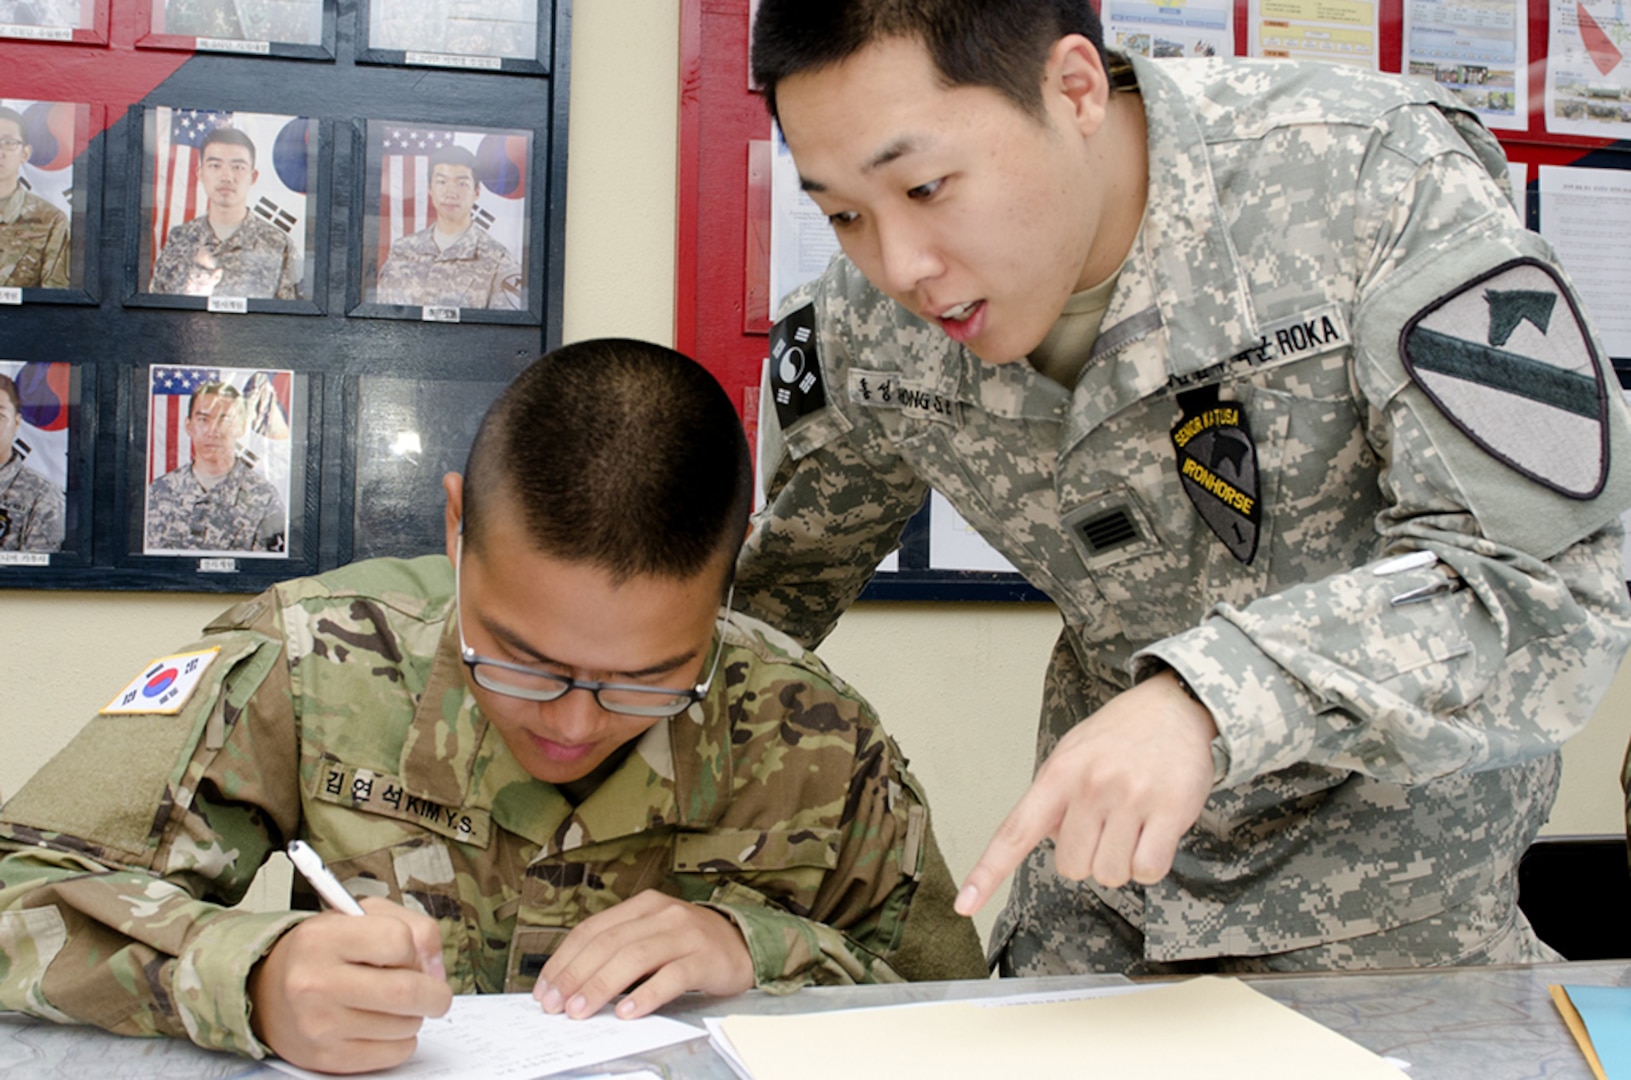 Sgt. Sung-Pyo Hong, a senior Korean Augmentation to the United States Army Soldier from Headquarters and Headquarters Company, 1st Armored Brigade Combat Team, 1st Cavalry Division, shows Pvt. Yeon-Seok Kim, a new KATUSA to the company, how to fill out personnel records, Sept. 1, 2016, at the Republic of Korea Army Support Office at Camp Hovey. Kim has been assigned to the brigade's ROKA Support Office as a human resources specialist. 